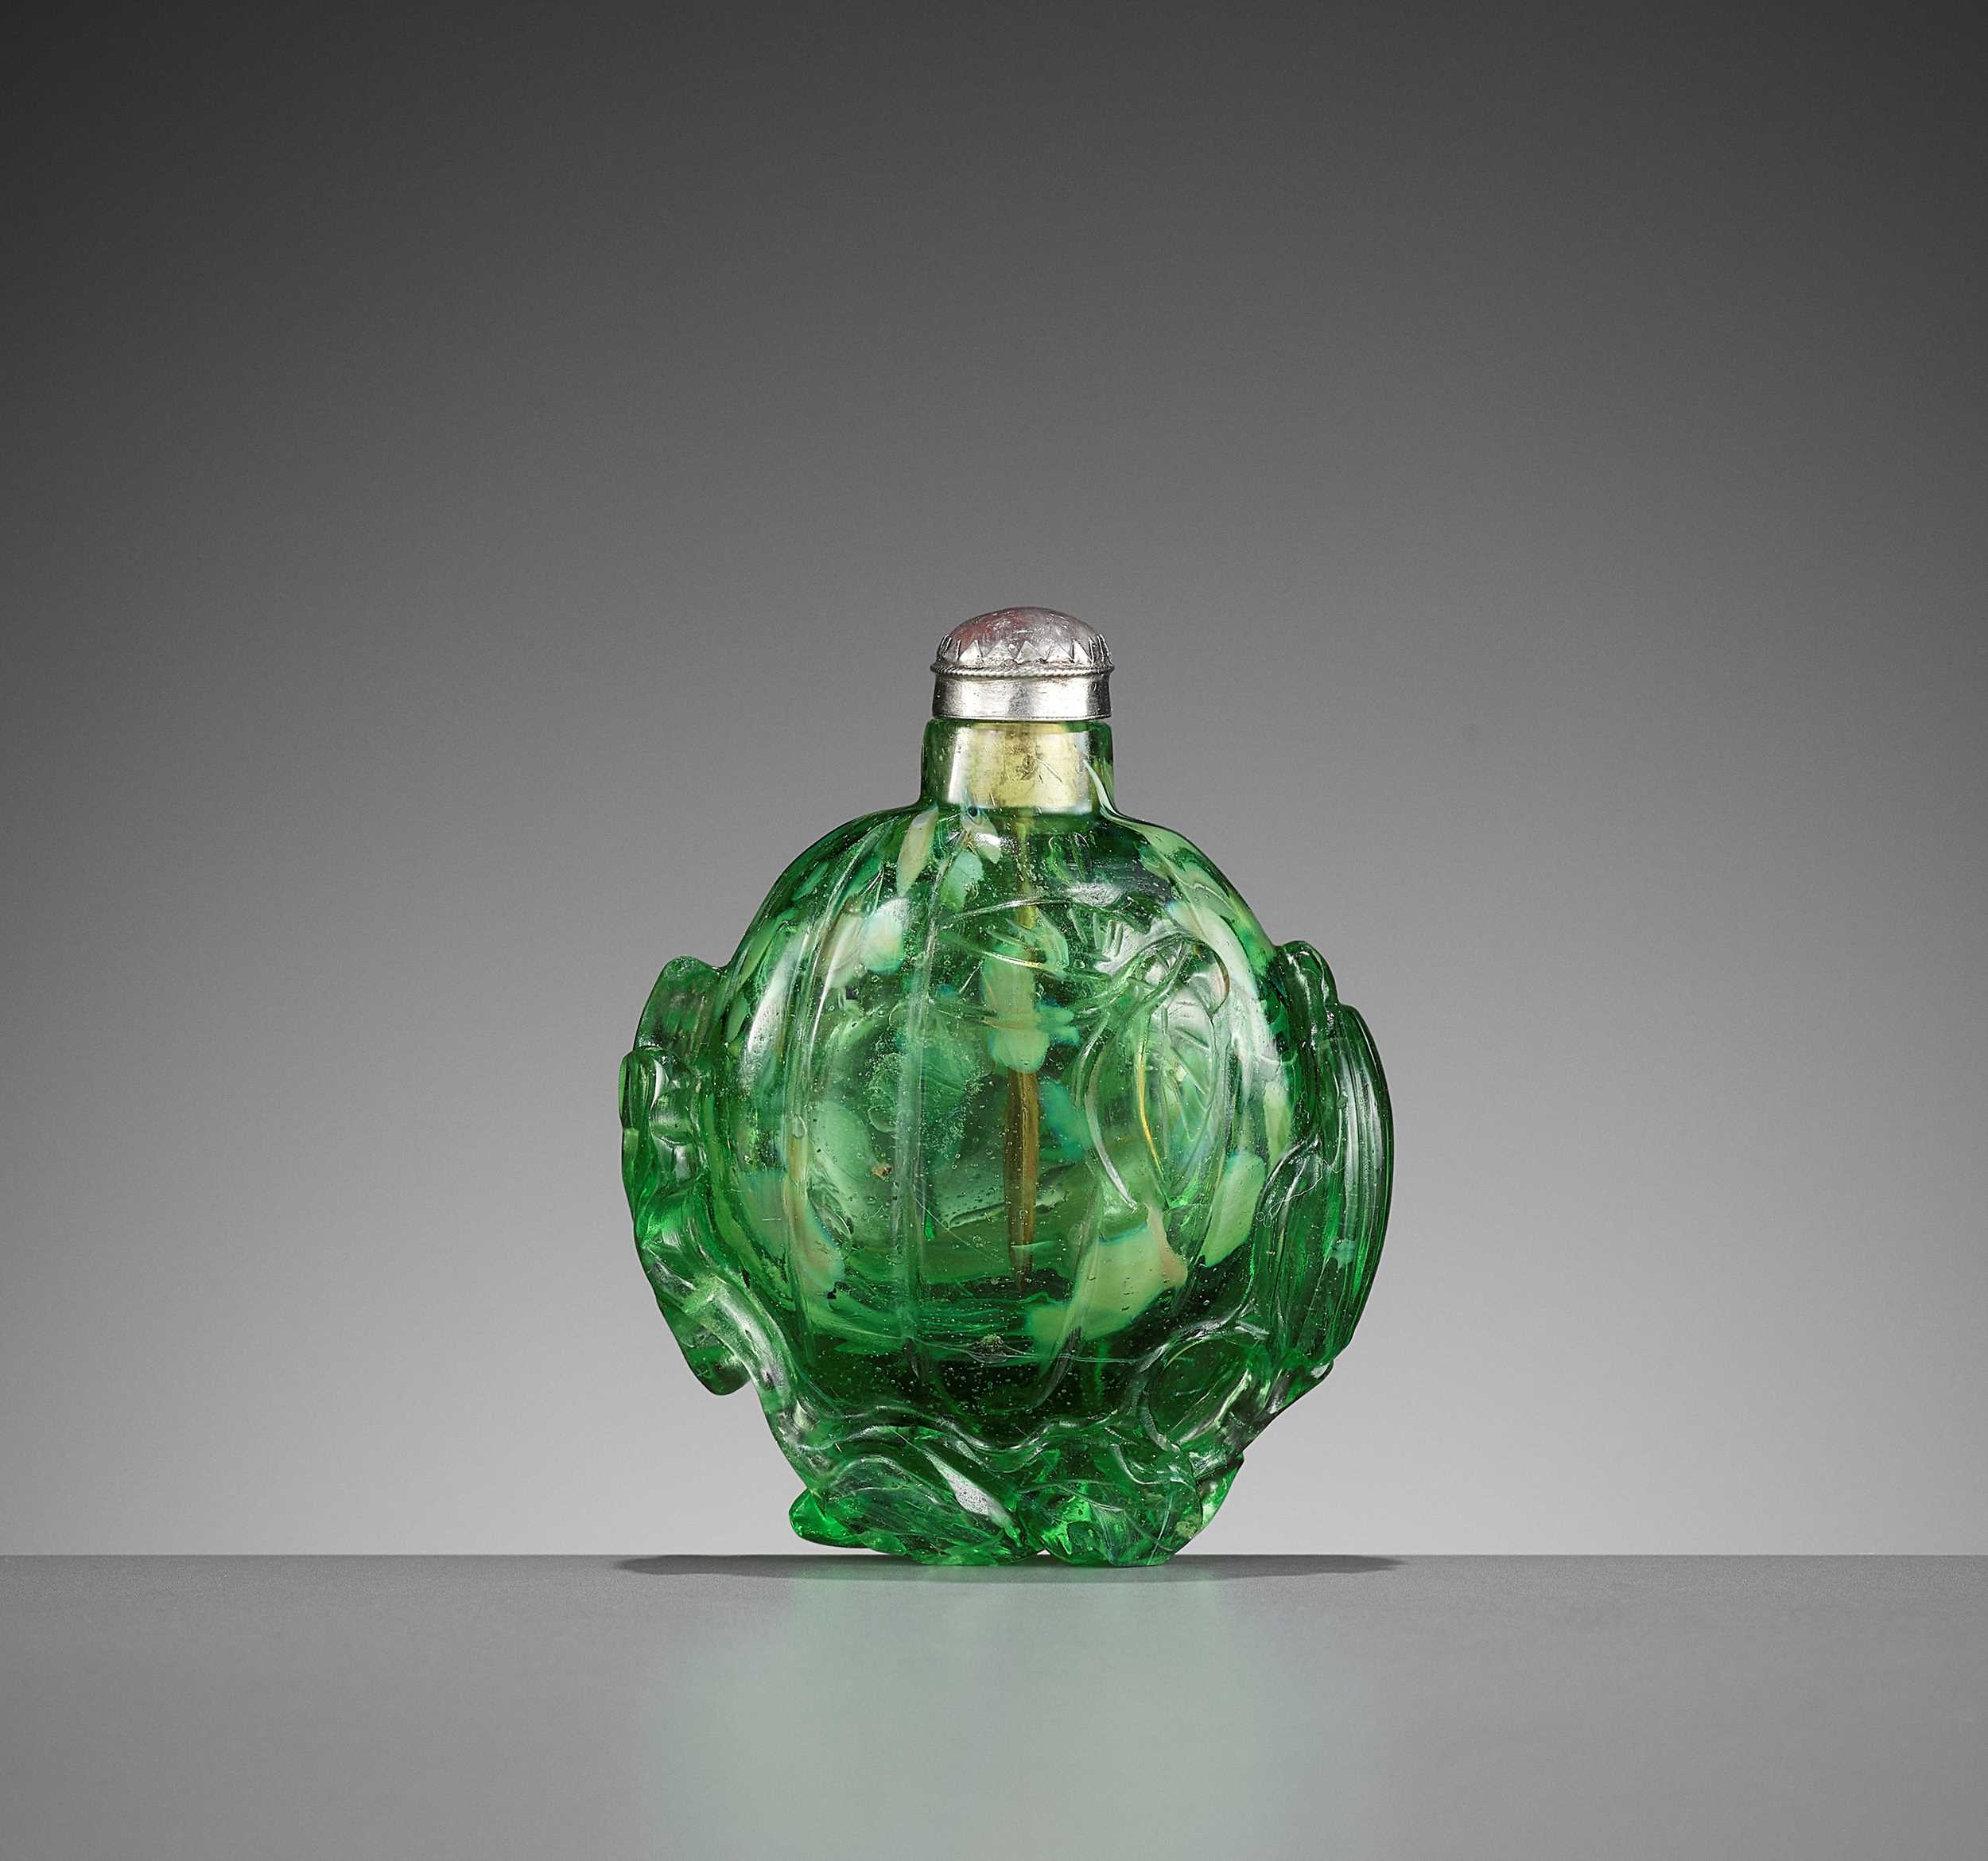 Lot 633 - A SANDWICH GLASS ‘MELON’ SNUFF BOTTLE, MID 18TH TO EARLY 19TH CENTURY